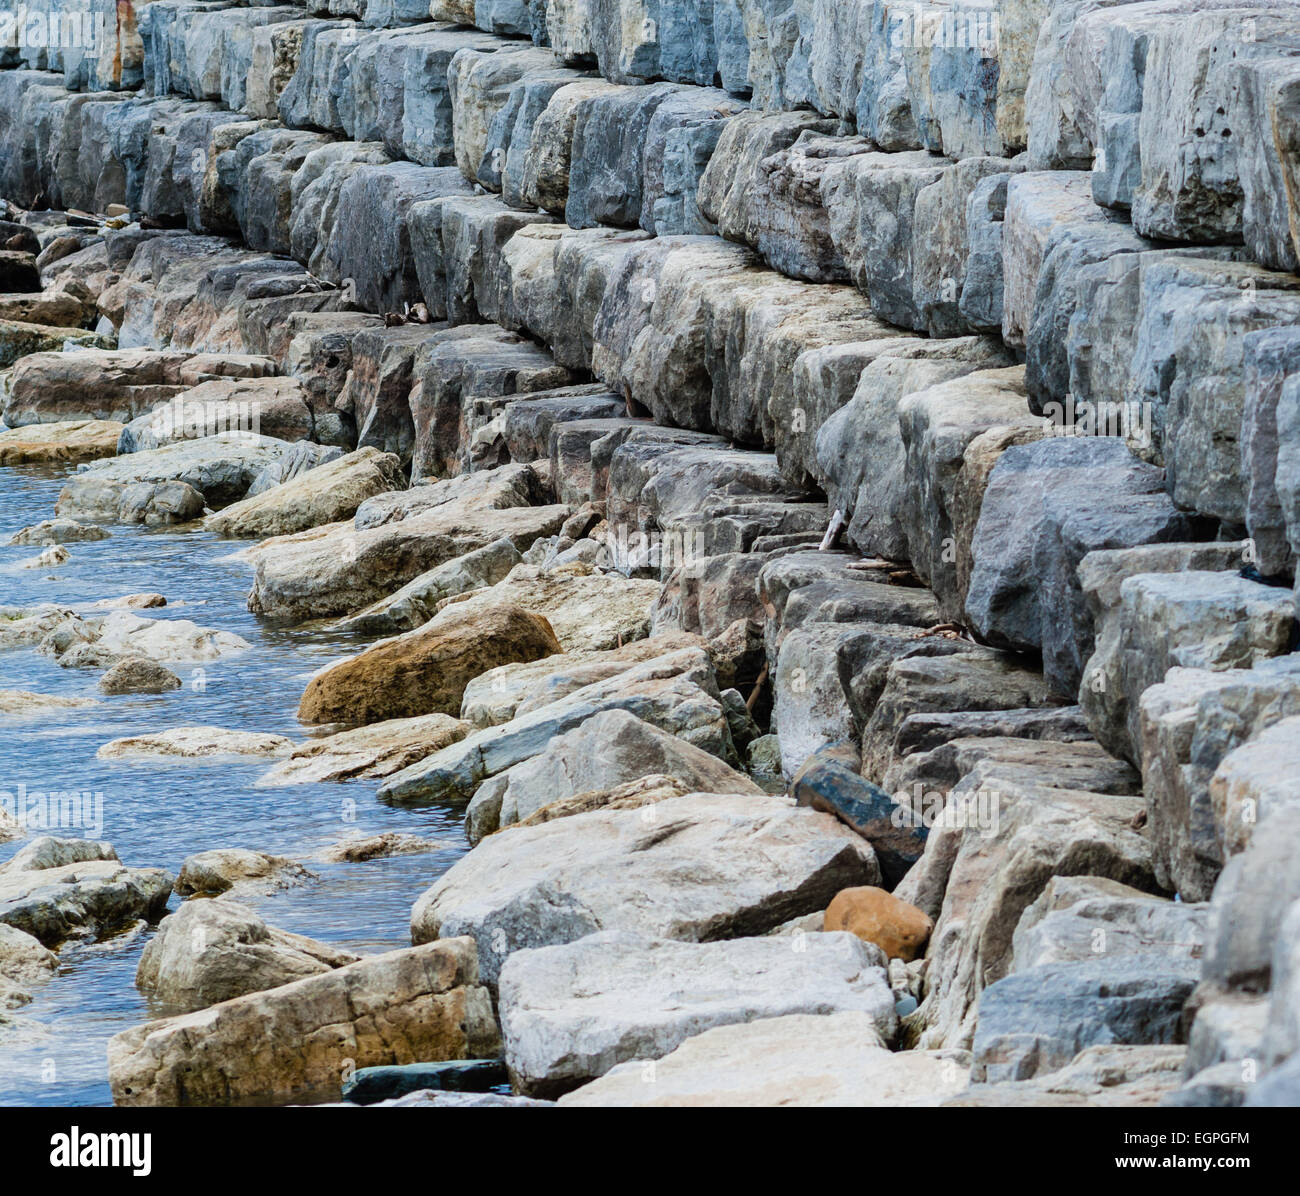 Curving breakwall of stacked stones on water. Stock Photo